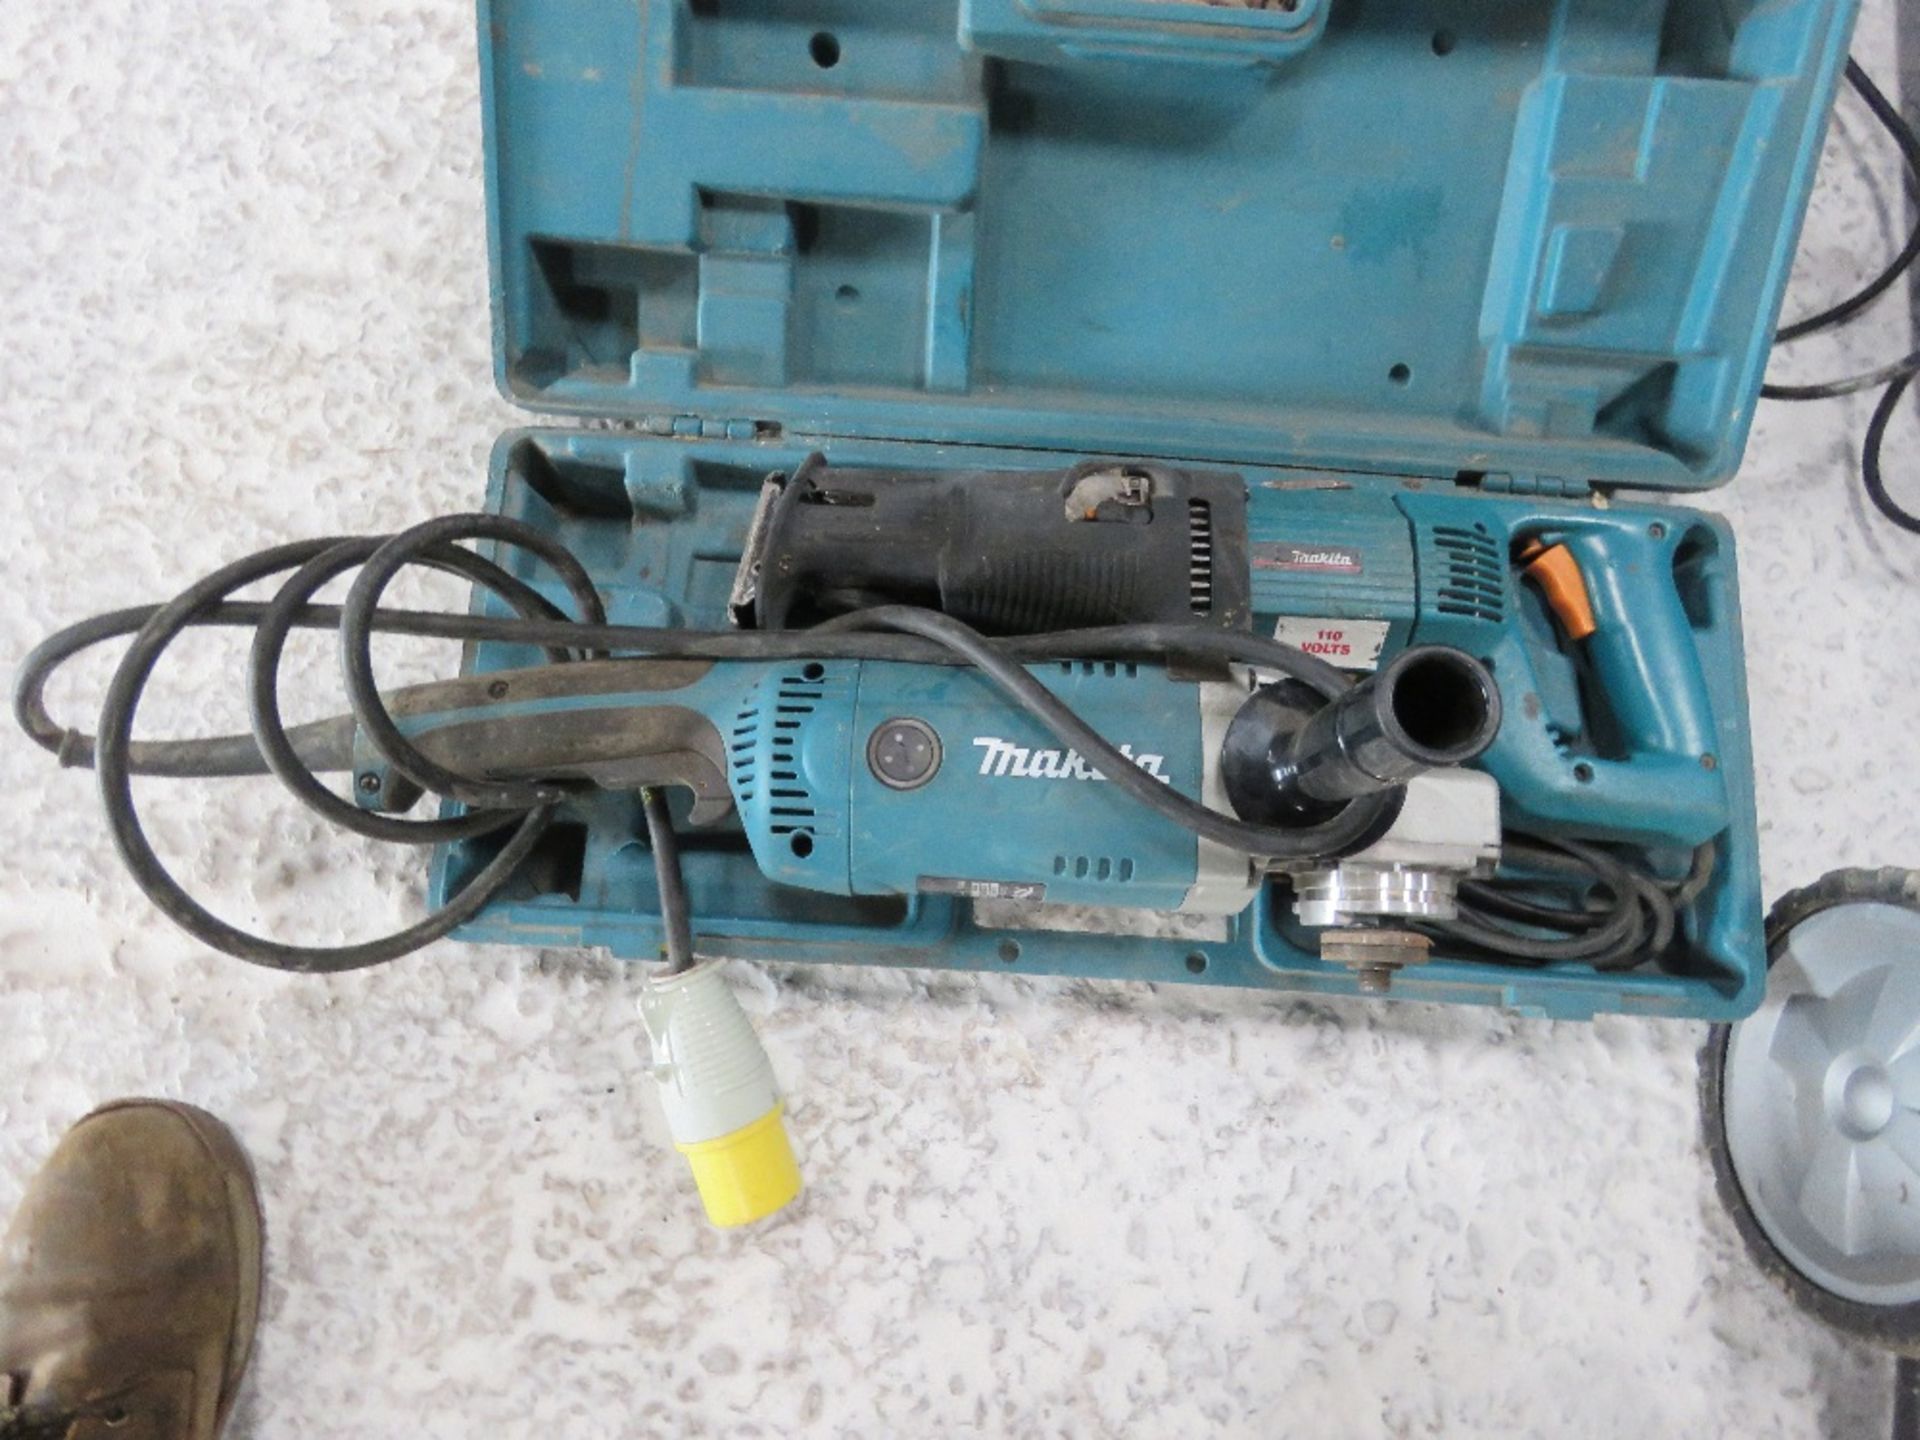 MAKITA 110VOLT GRINDER PLUS A RECIPROCATING SAW.....THIS LOT IS SOLD UNDER THE AUCTIONEERS MARGIN SC - Image 3 of 3